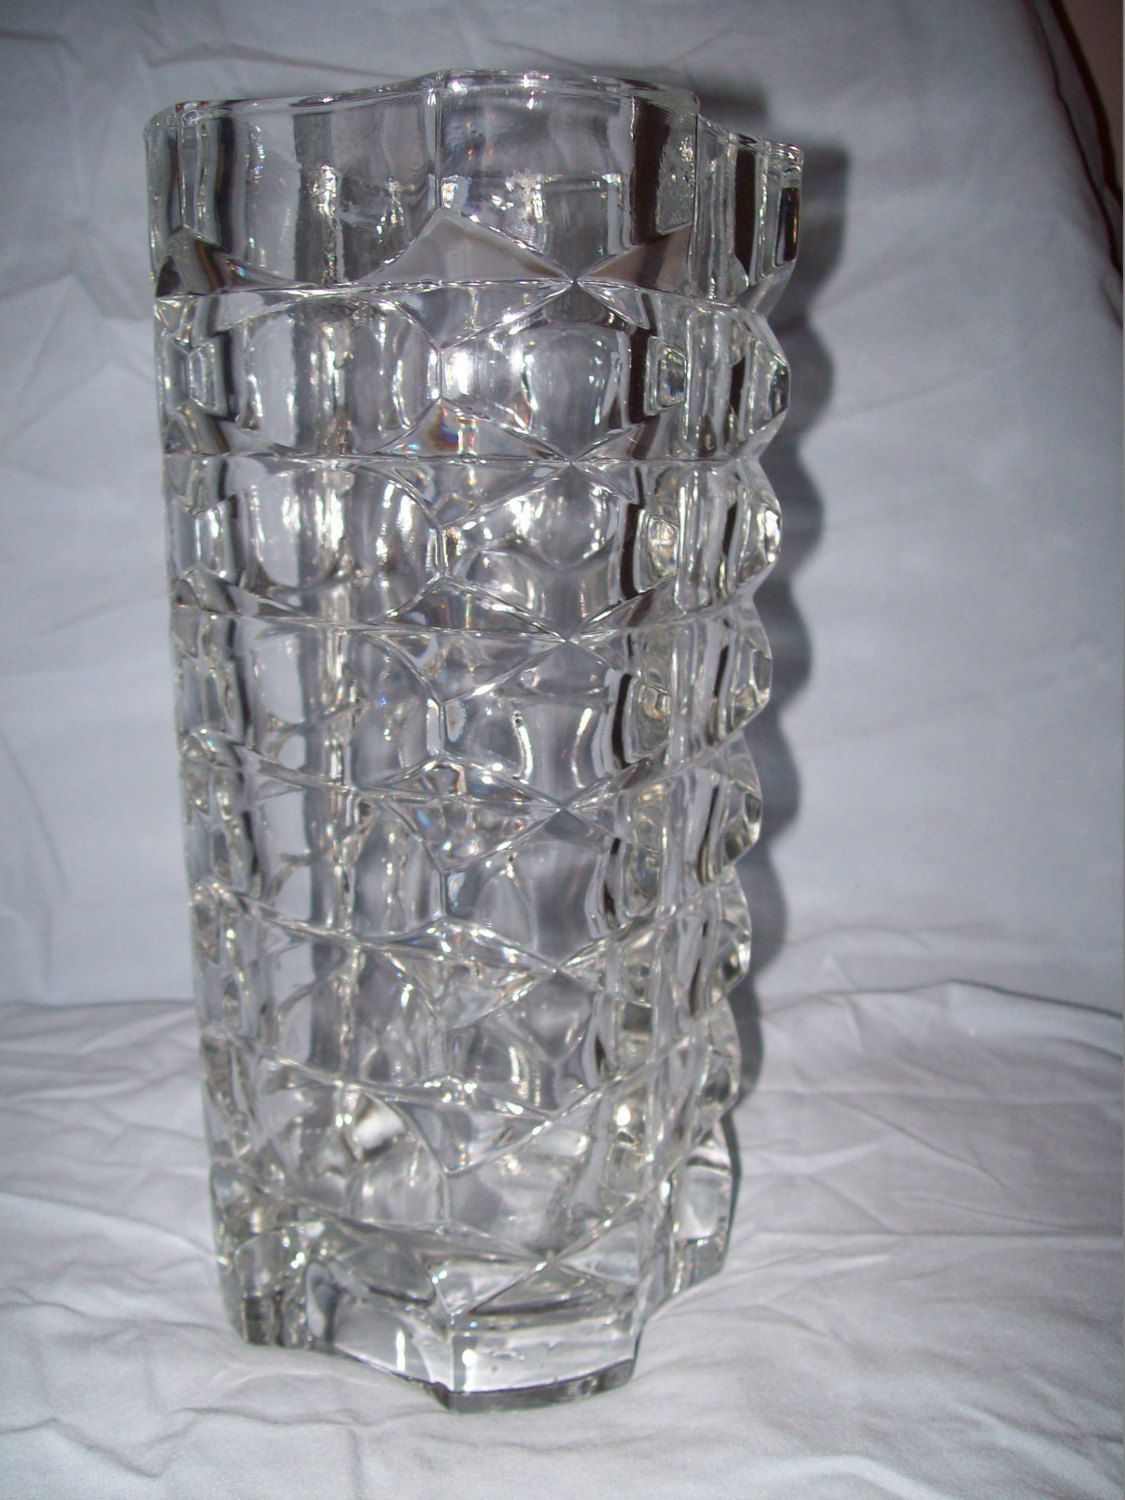 23 Stunning Leaded Glass Vase 2024 free download leaded glass vase of clear glass vases image clear glass very old large vase leaded glass for clear glass vases image clear glass very old large vase leaded glass very heavy 66 00